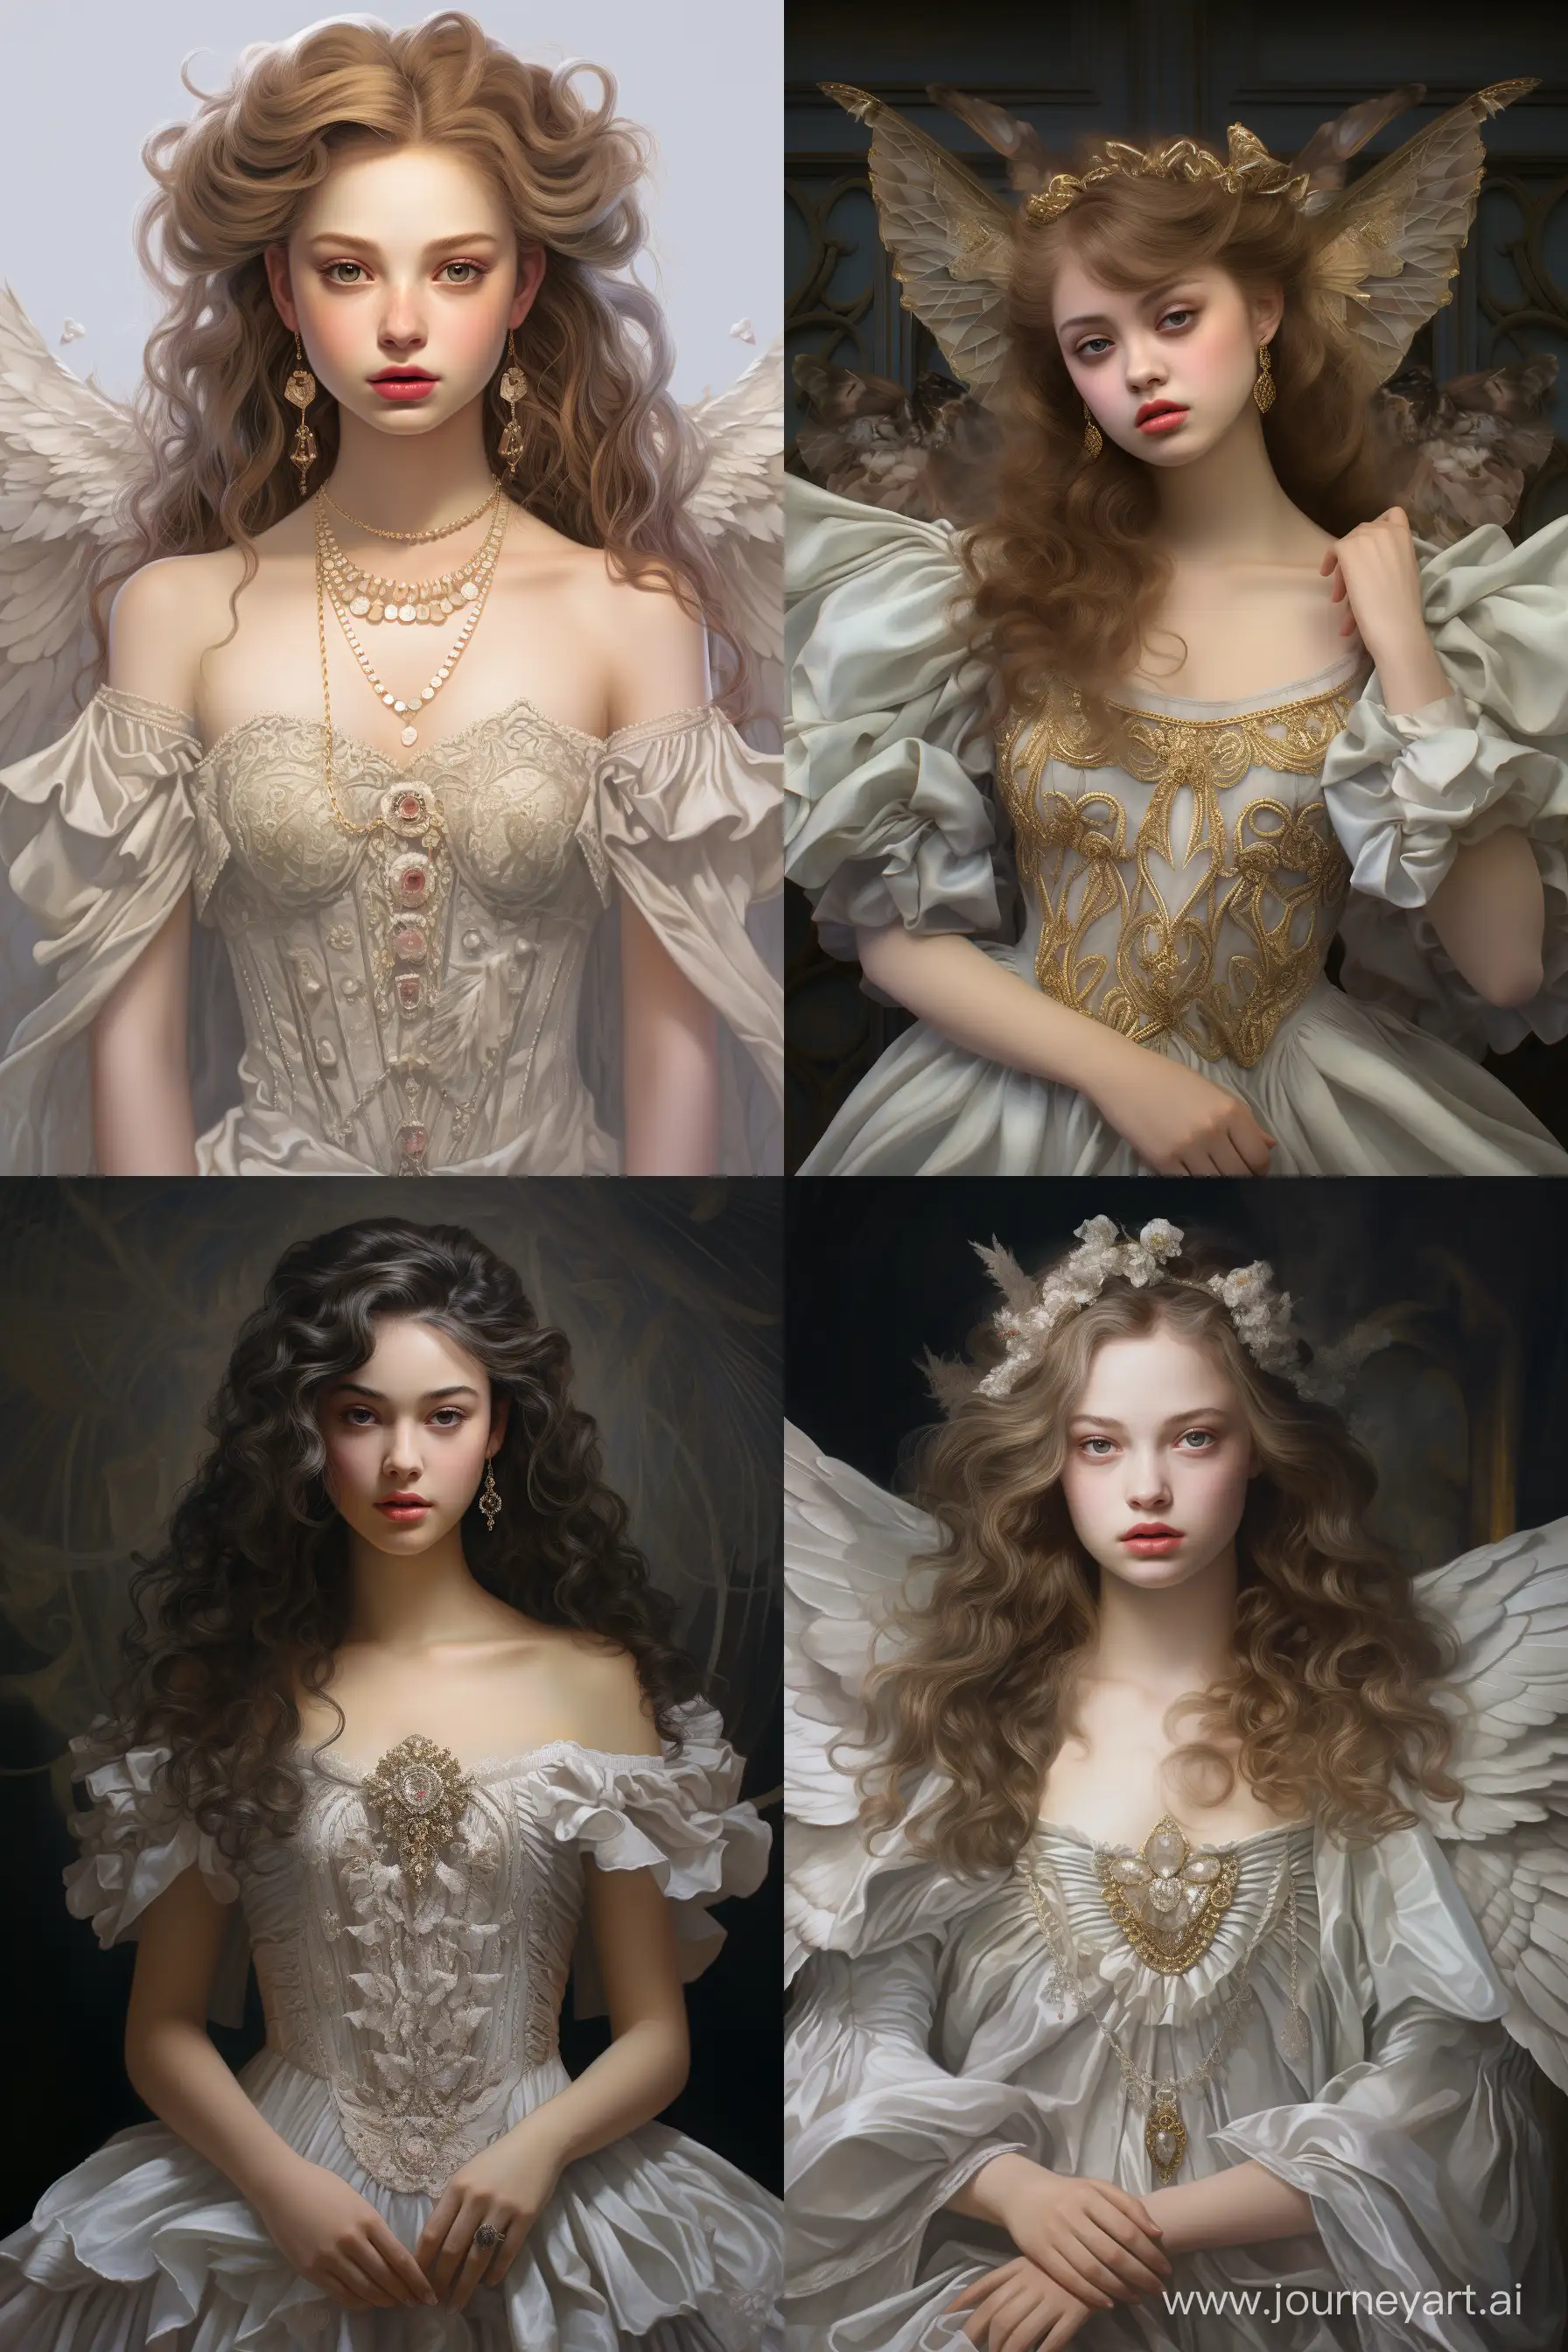 A realistic, highly-detailed portrait of a breathtakingly beautiful 19-year-old girl resembling an angel, dressed in a vintage princess costume. The image should evoke a sense of ethereal elegance and grace. The orientation should be vertical to capture the full majesty of the subject. --s 150 --ar 2:3